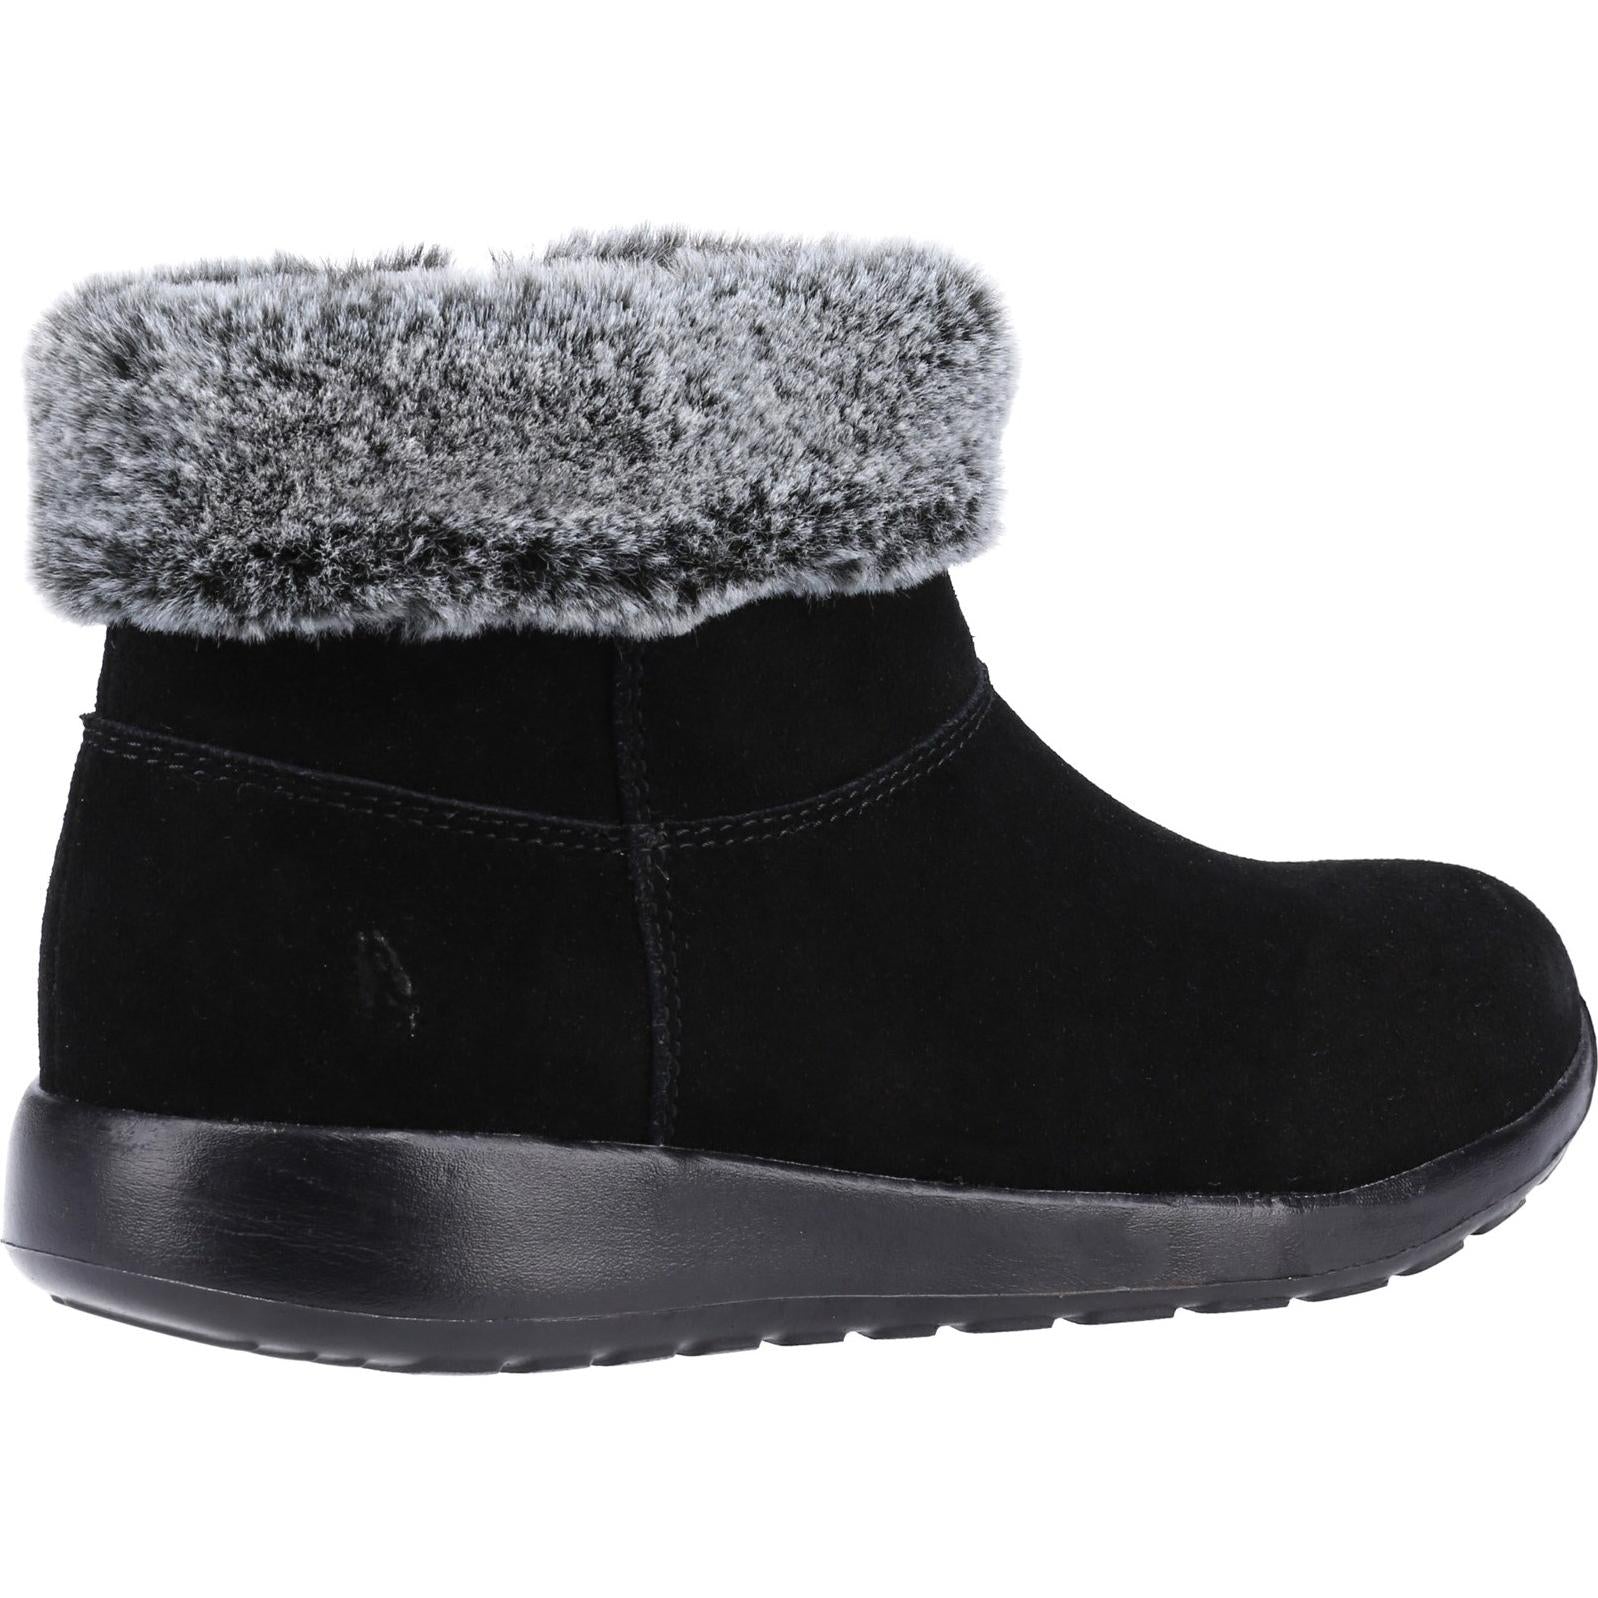 Hush Puppies Lollie Ankle Boot